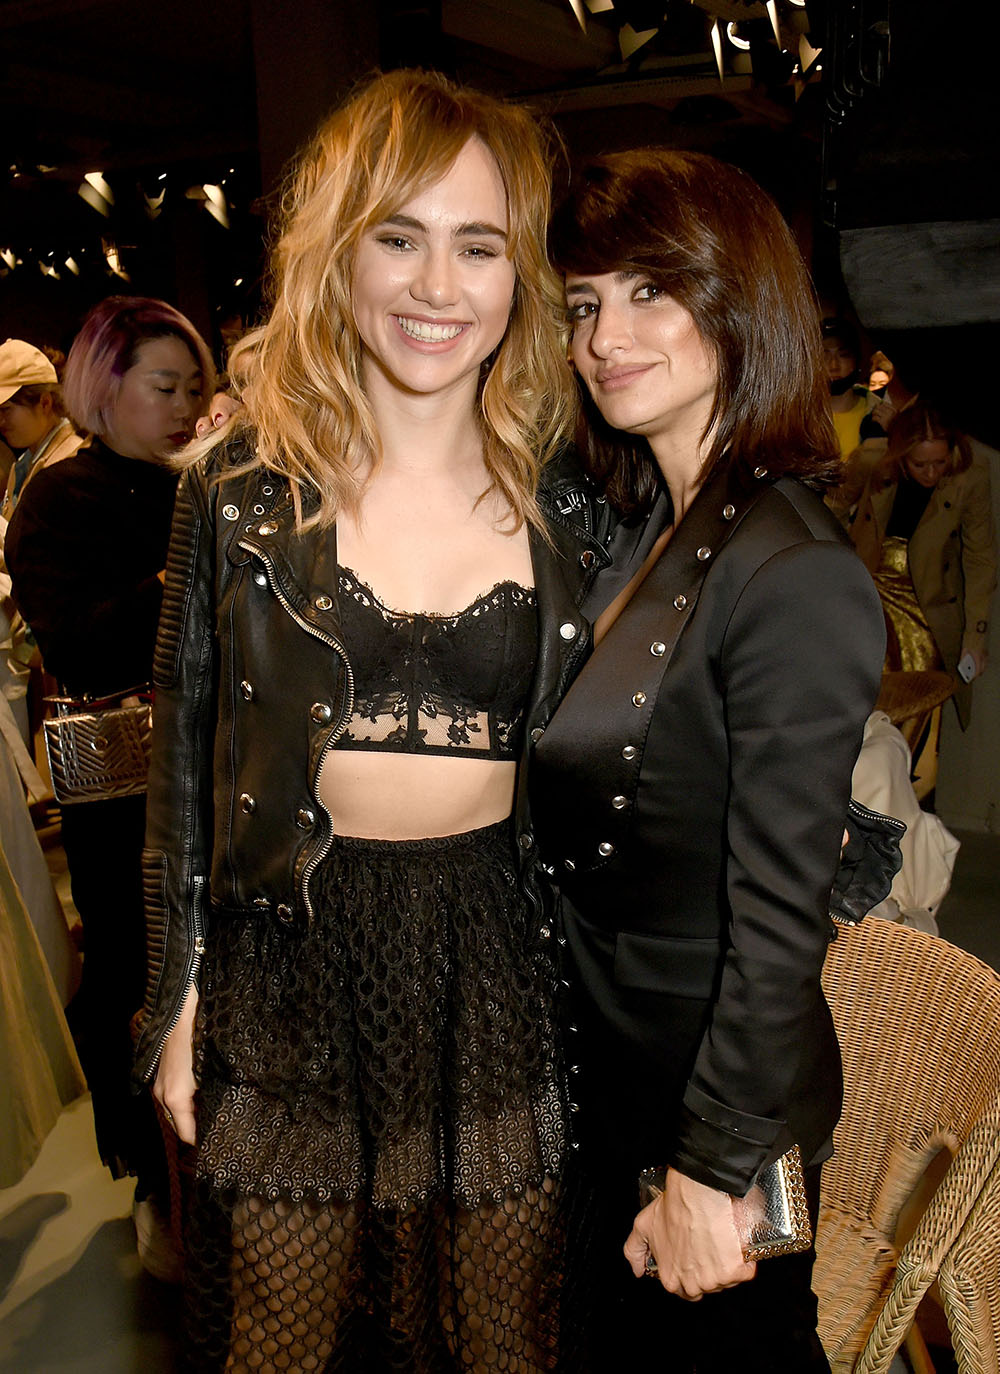 LONDON, ENGLAND - FEBRUARY 20: (L-R) Suki Waterhouse and Penelope Cruz wearing Burberry attend the Burberry February 2017 Show during London Fashion Week February 2017 at Makers House on February 20, 2017 in London, England. (Photo by David M. Benett/Dave Benett/Getty Images for Burberry)